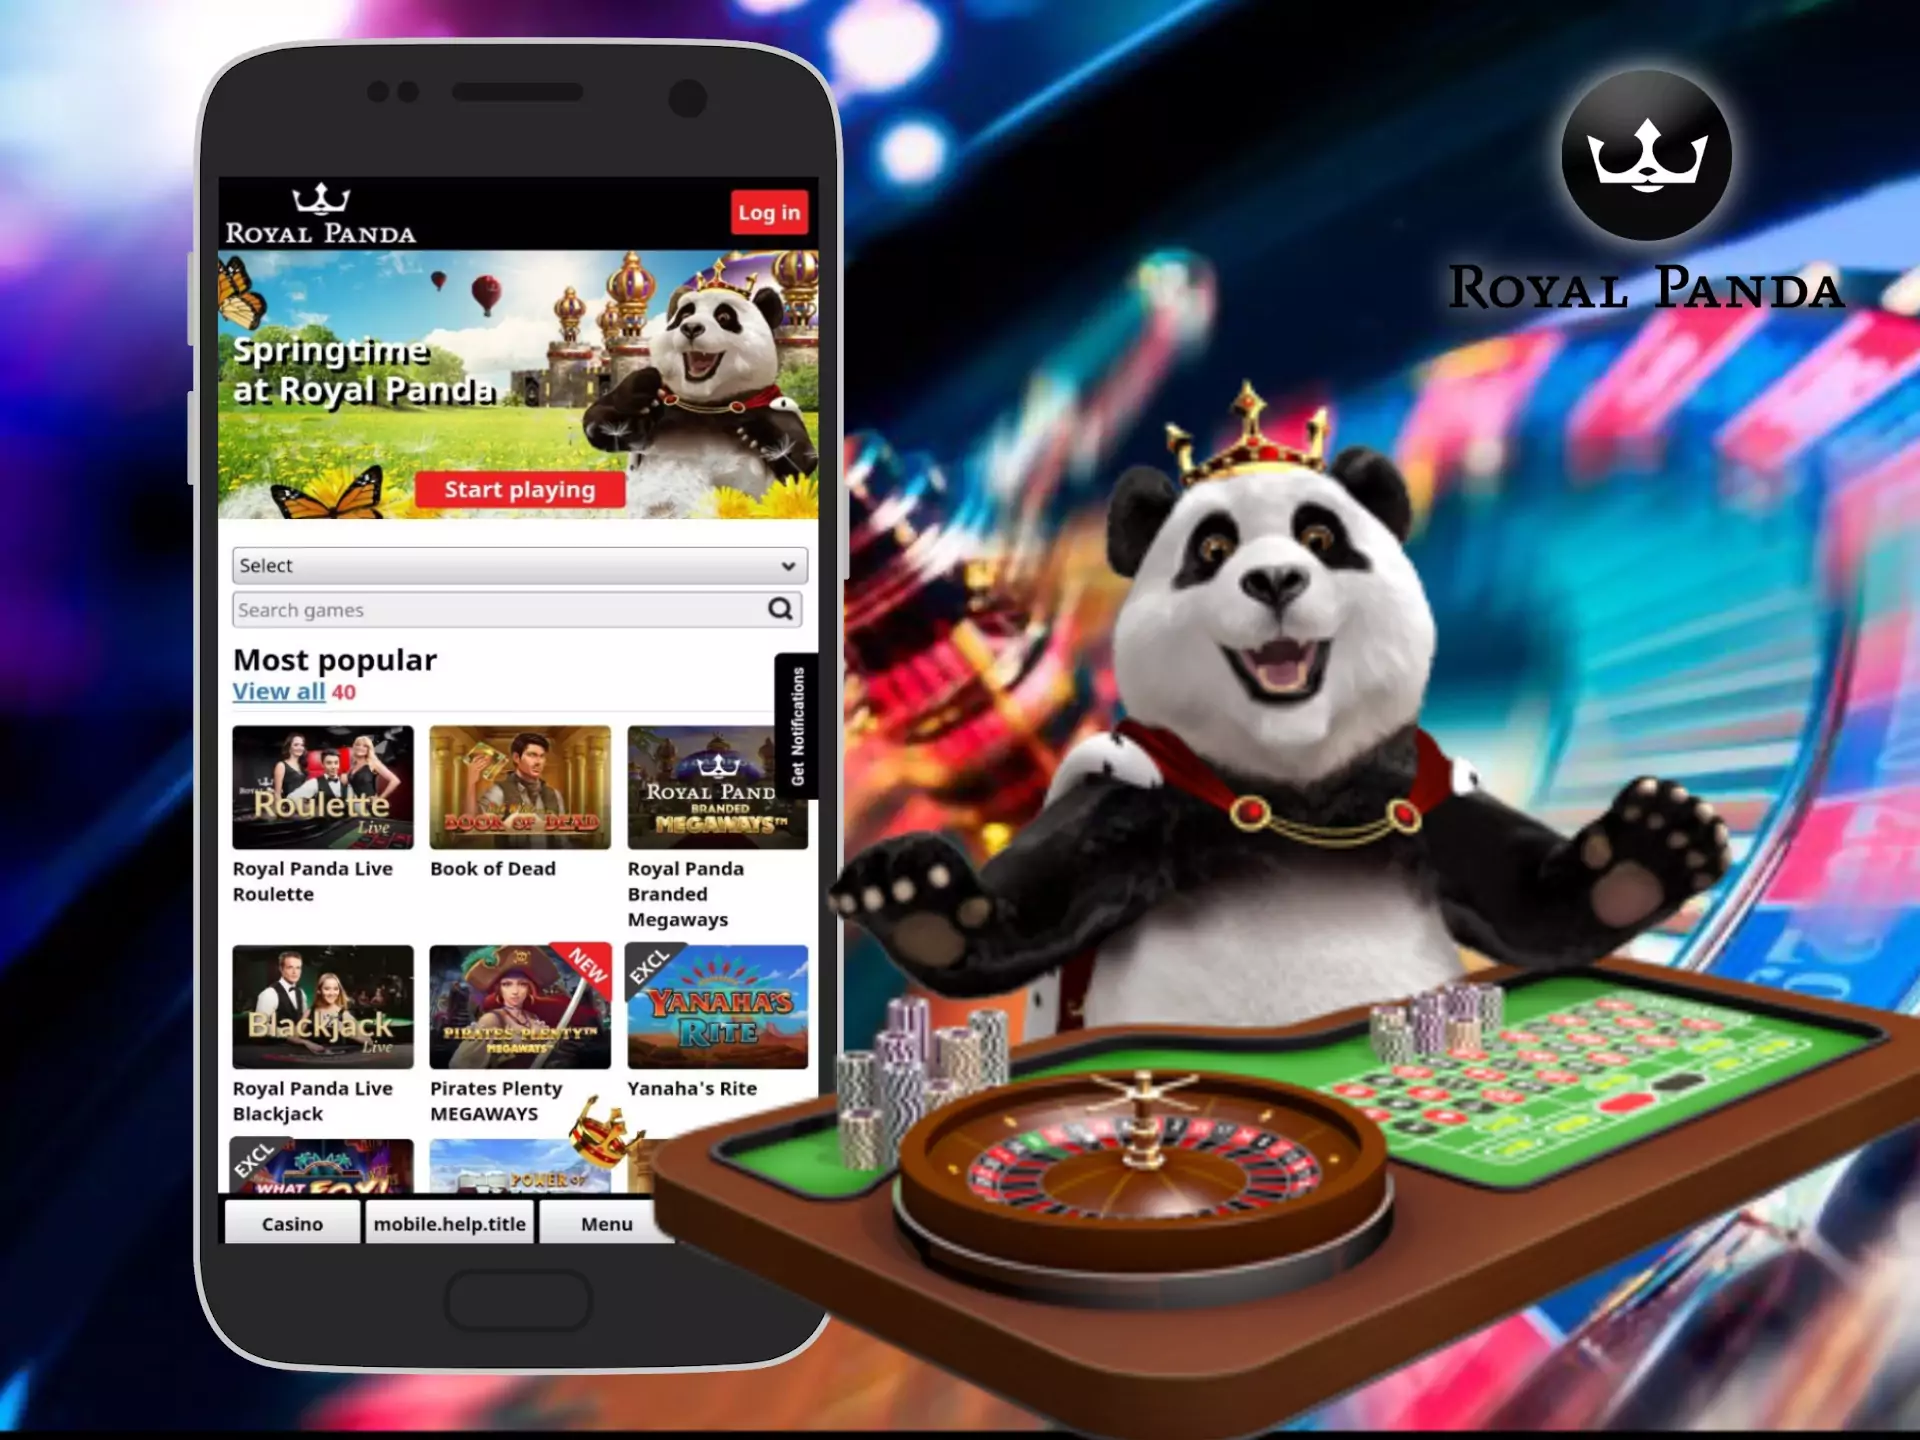 You can use a mobile version instead of Royal Panda app, if you do not want to download any software.